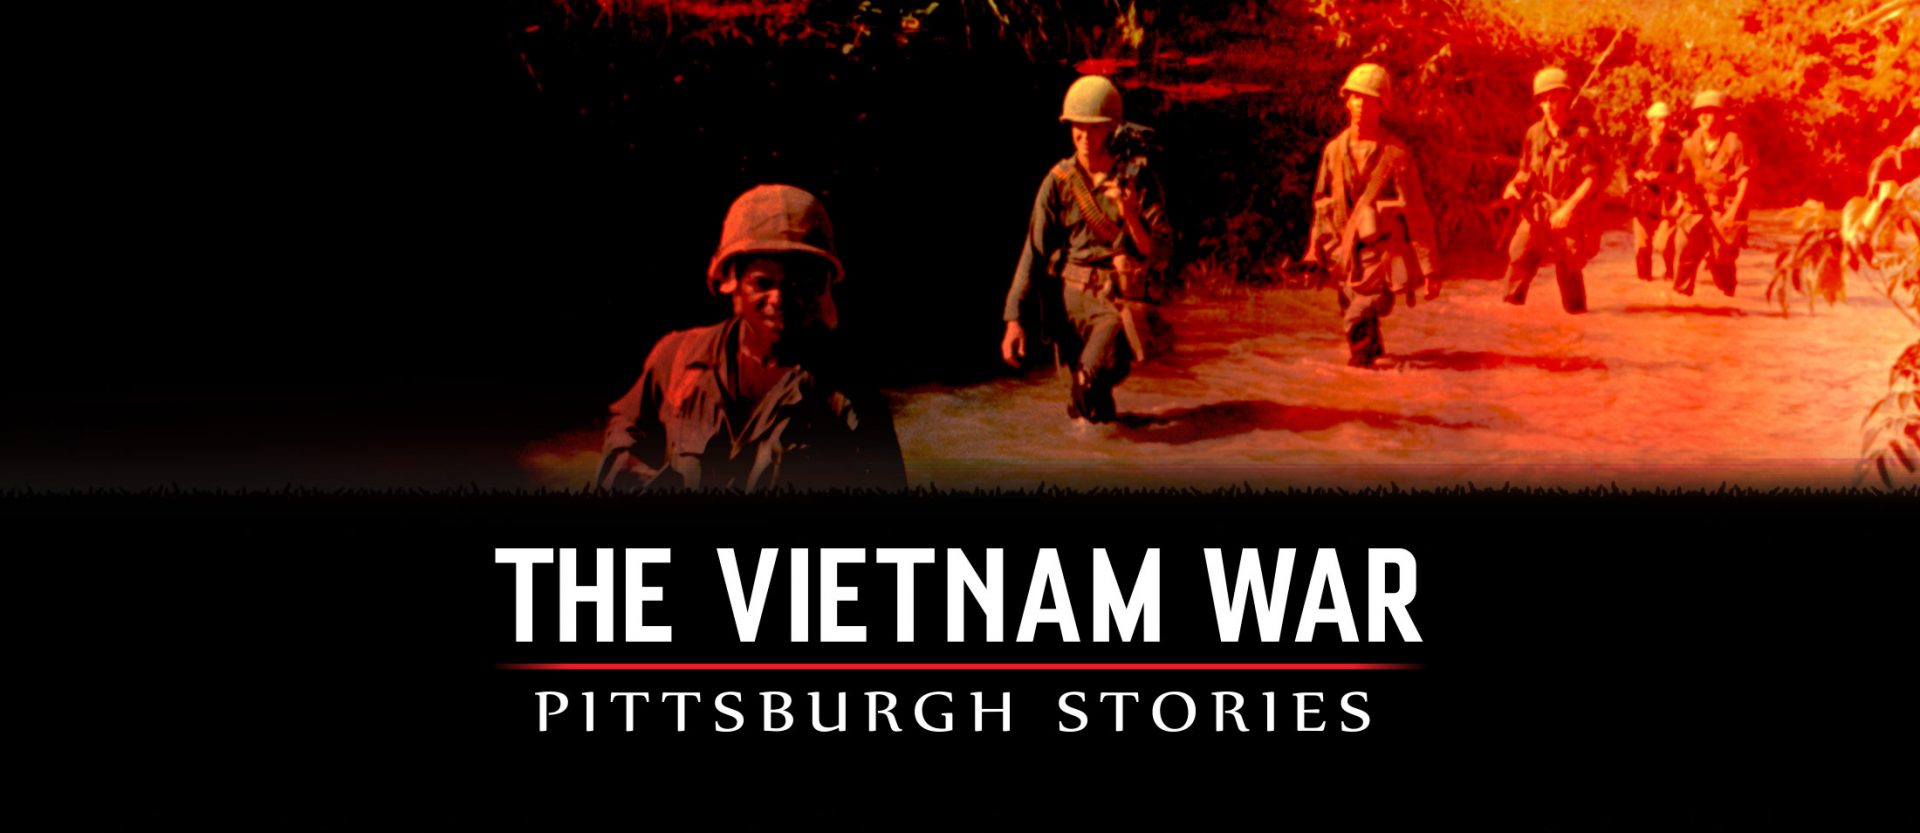 Vietnam War Pittsburgh Stories title card with soldiers